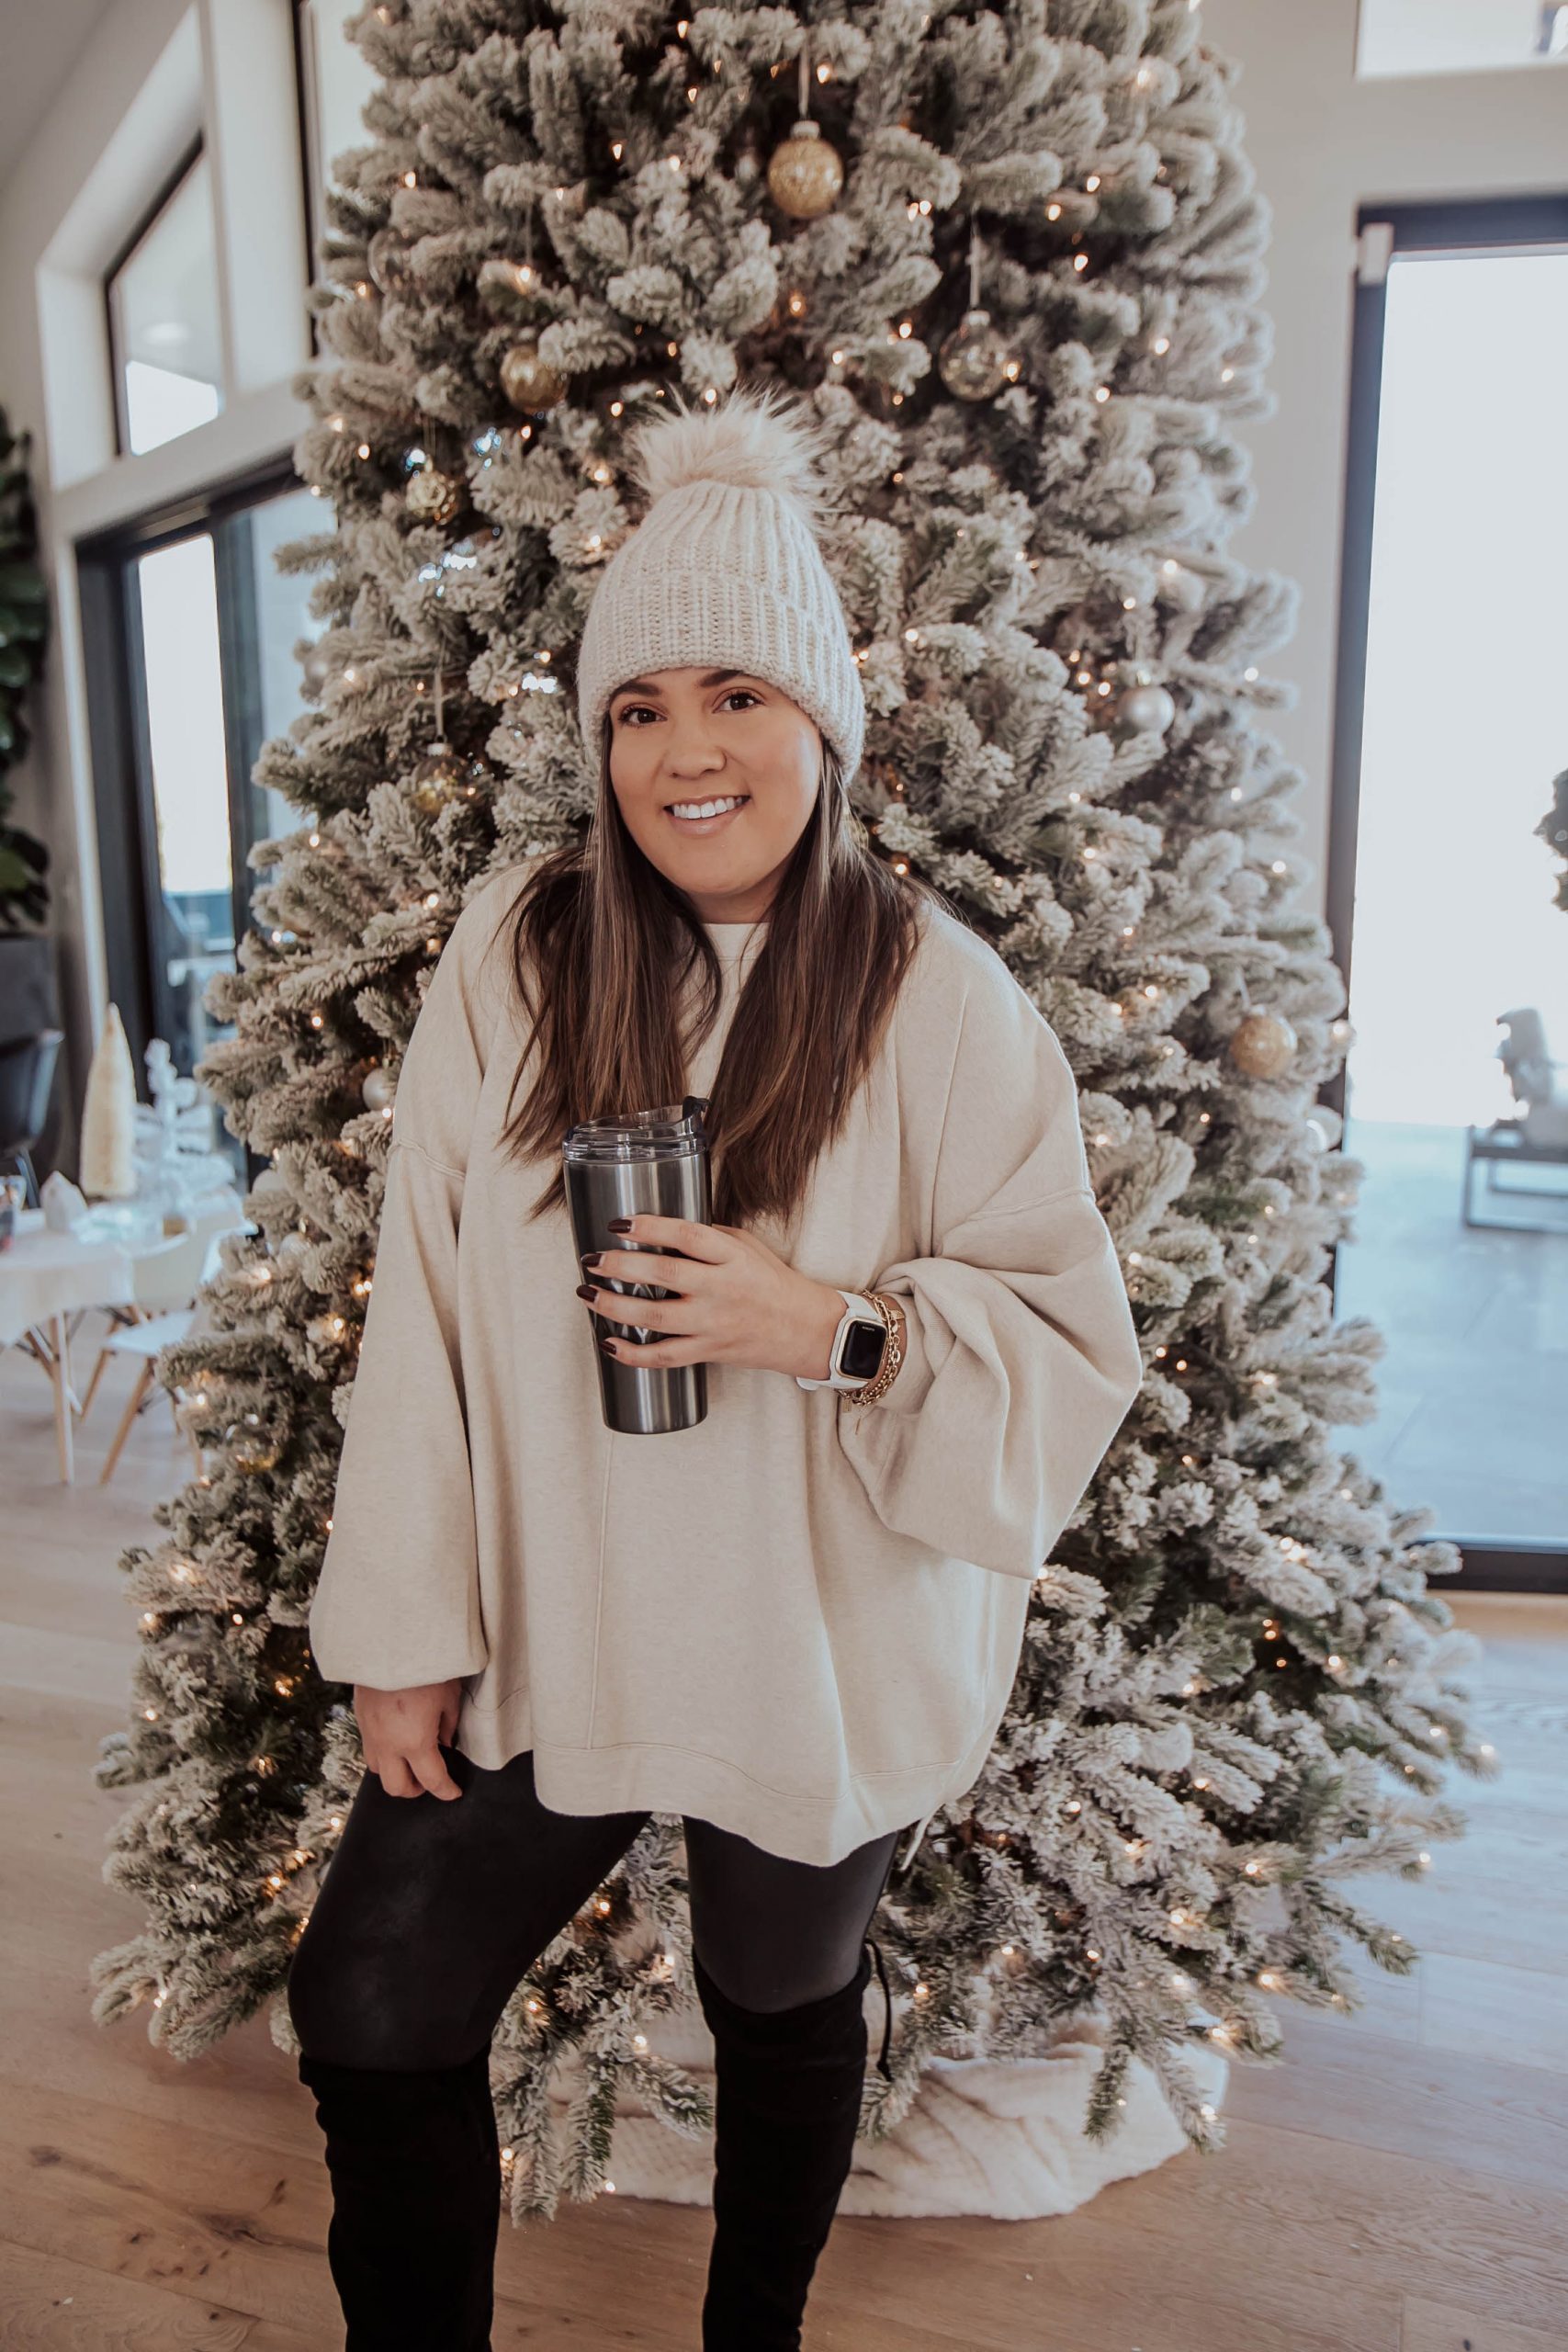 Ashley and Emily of The Ashley and Emily blog, share why you should give the gift of Garmin this December. They are our favorite smartwatches.